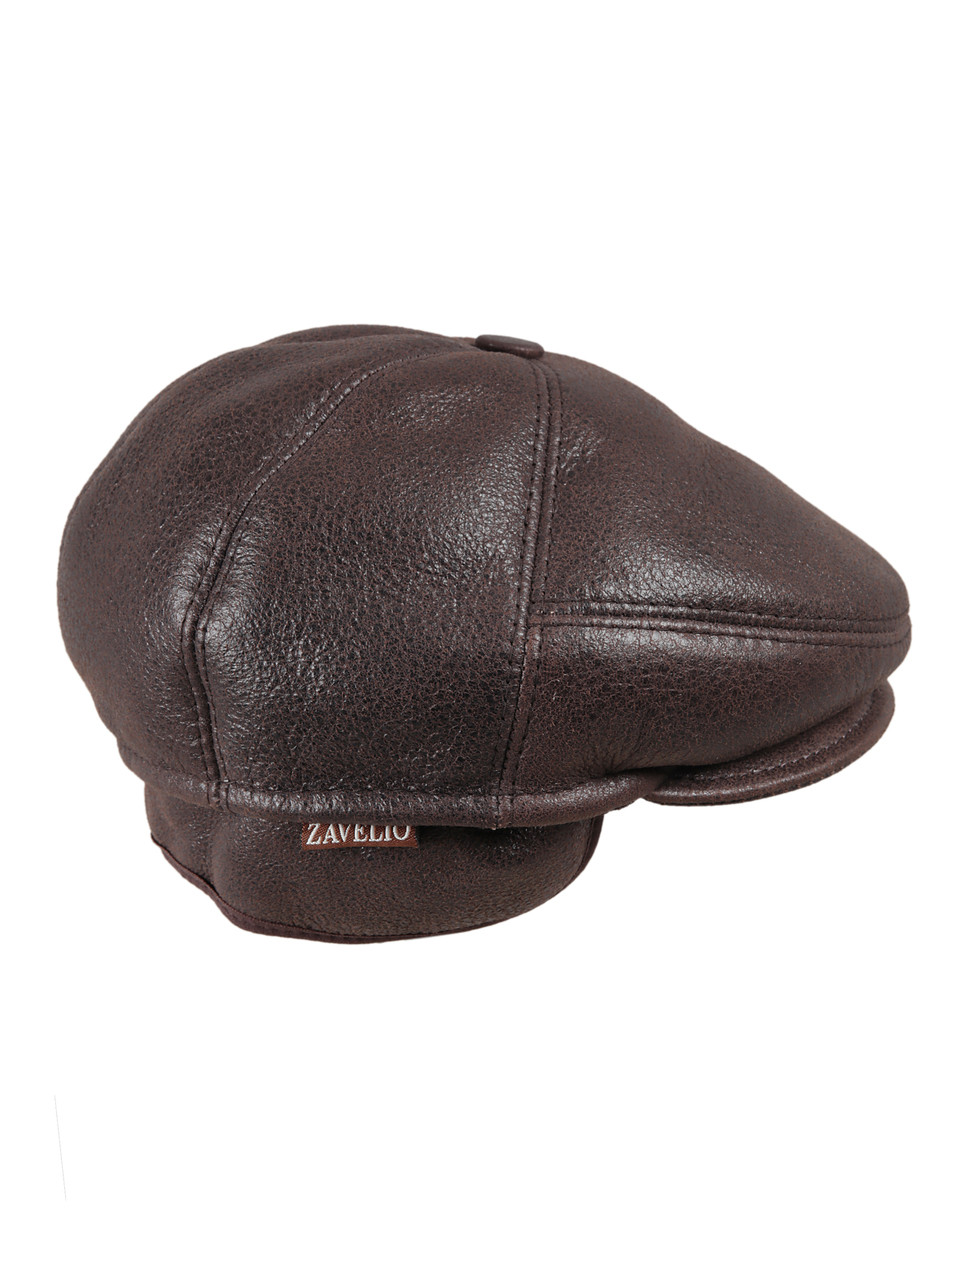 Men's Leather Shearling Sheepskin 5 Panel Ivy Driving Cap Cashmere ...